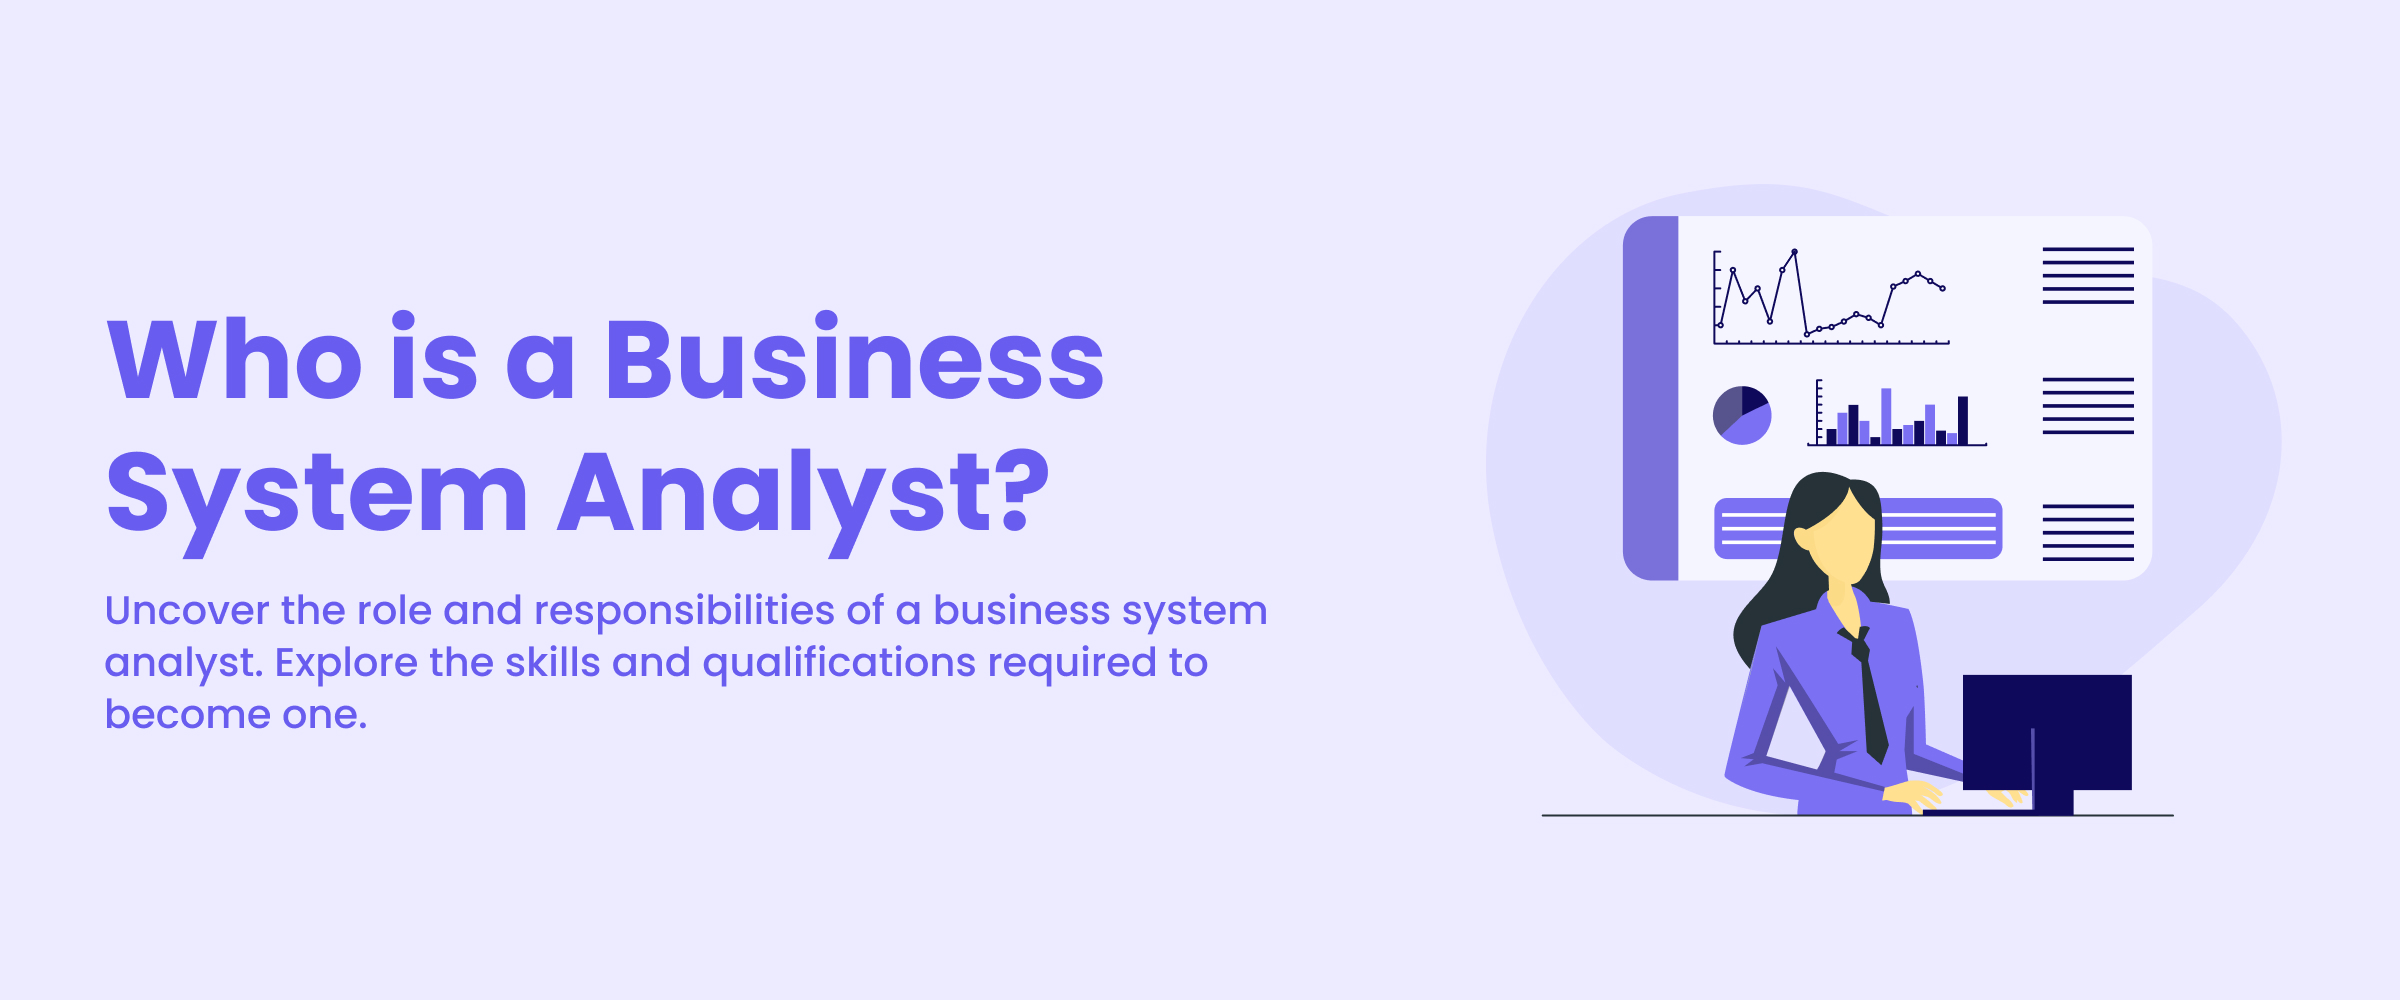 Who is a Business System Analyst